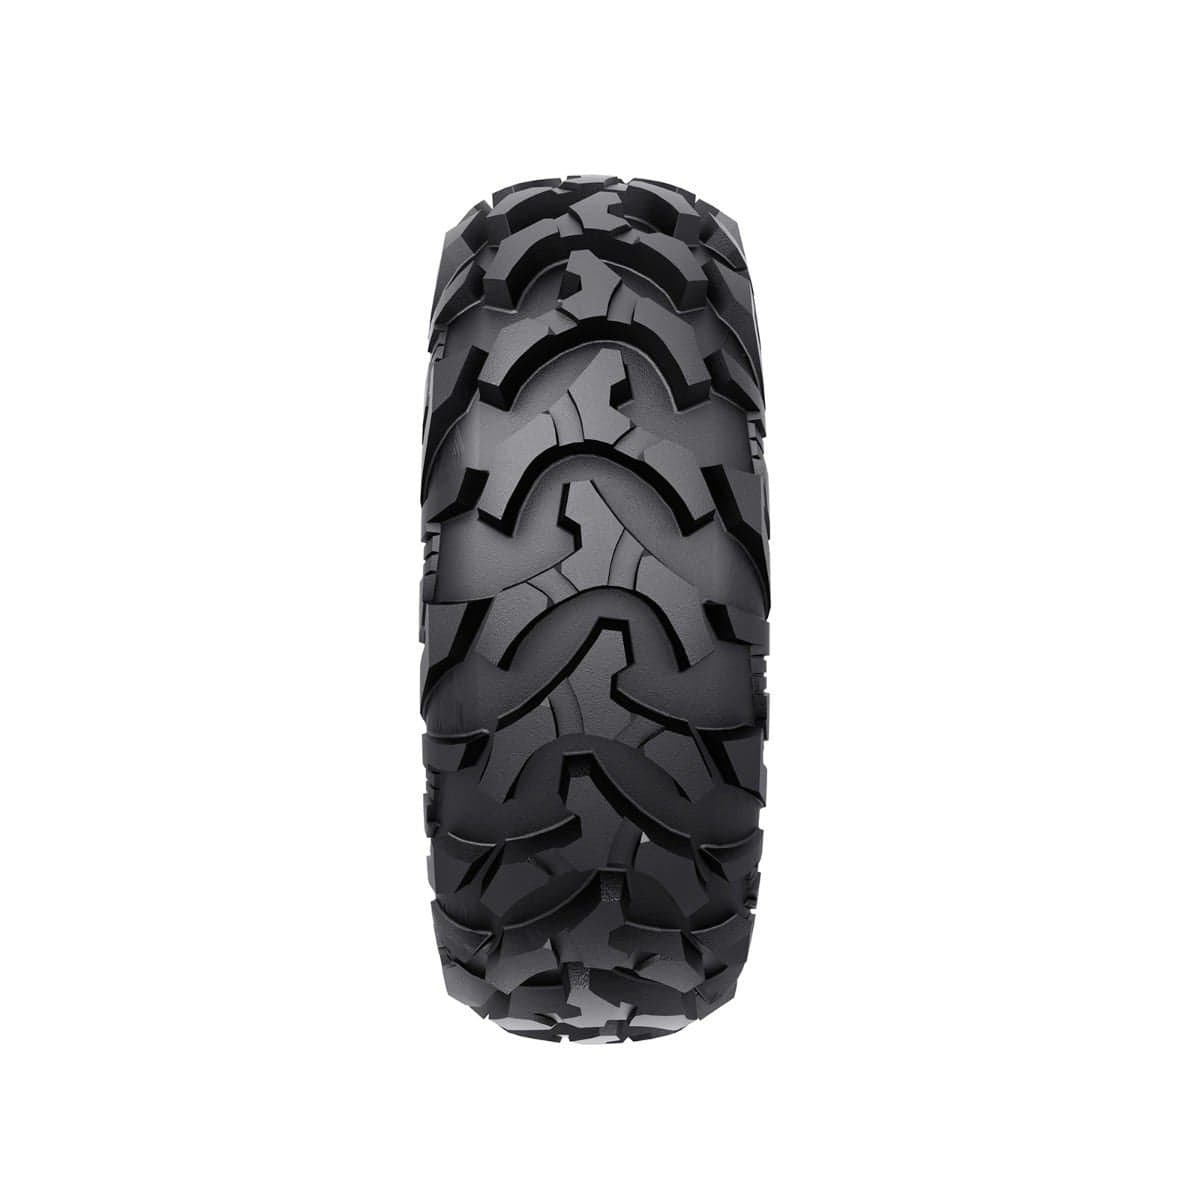 XPS Trail King Tire